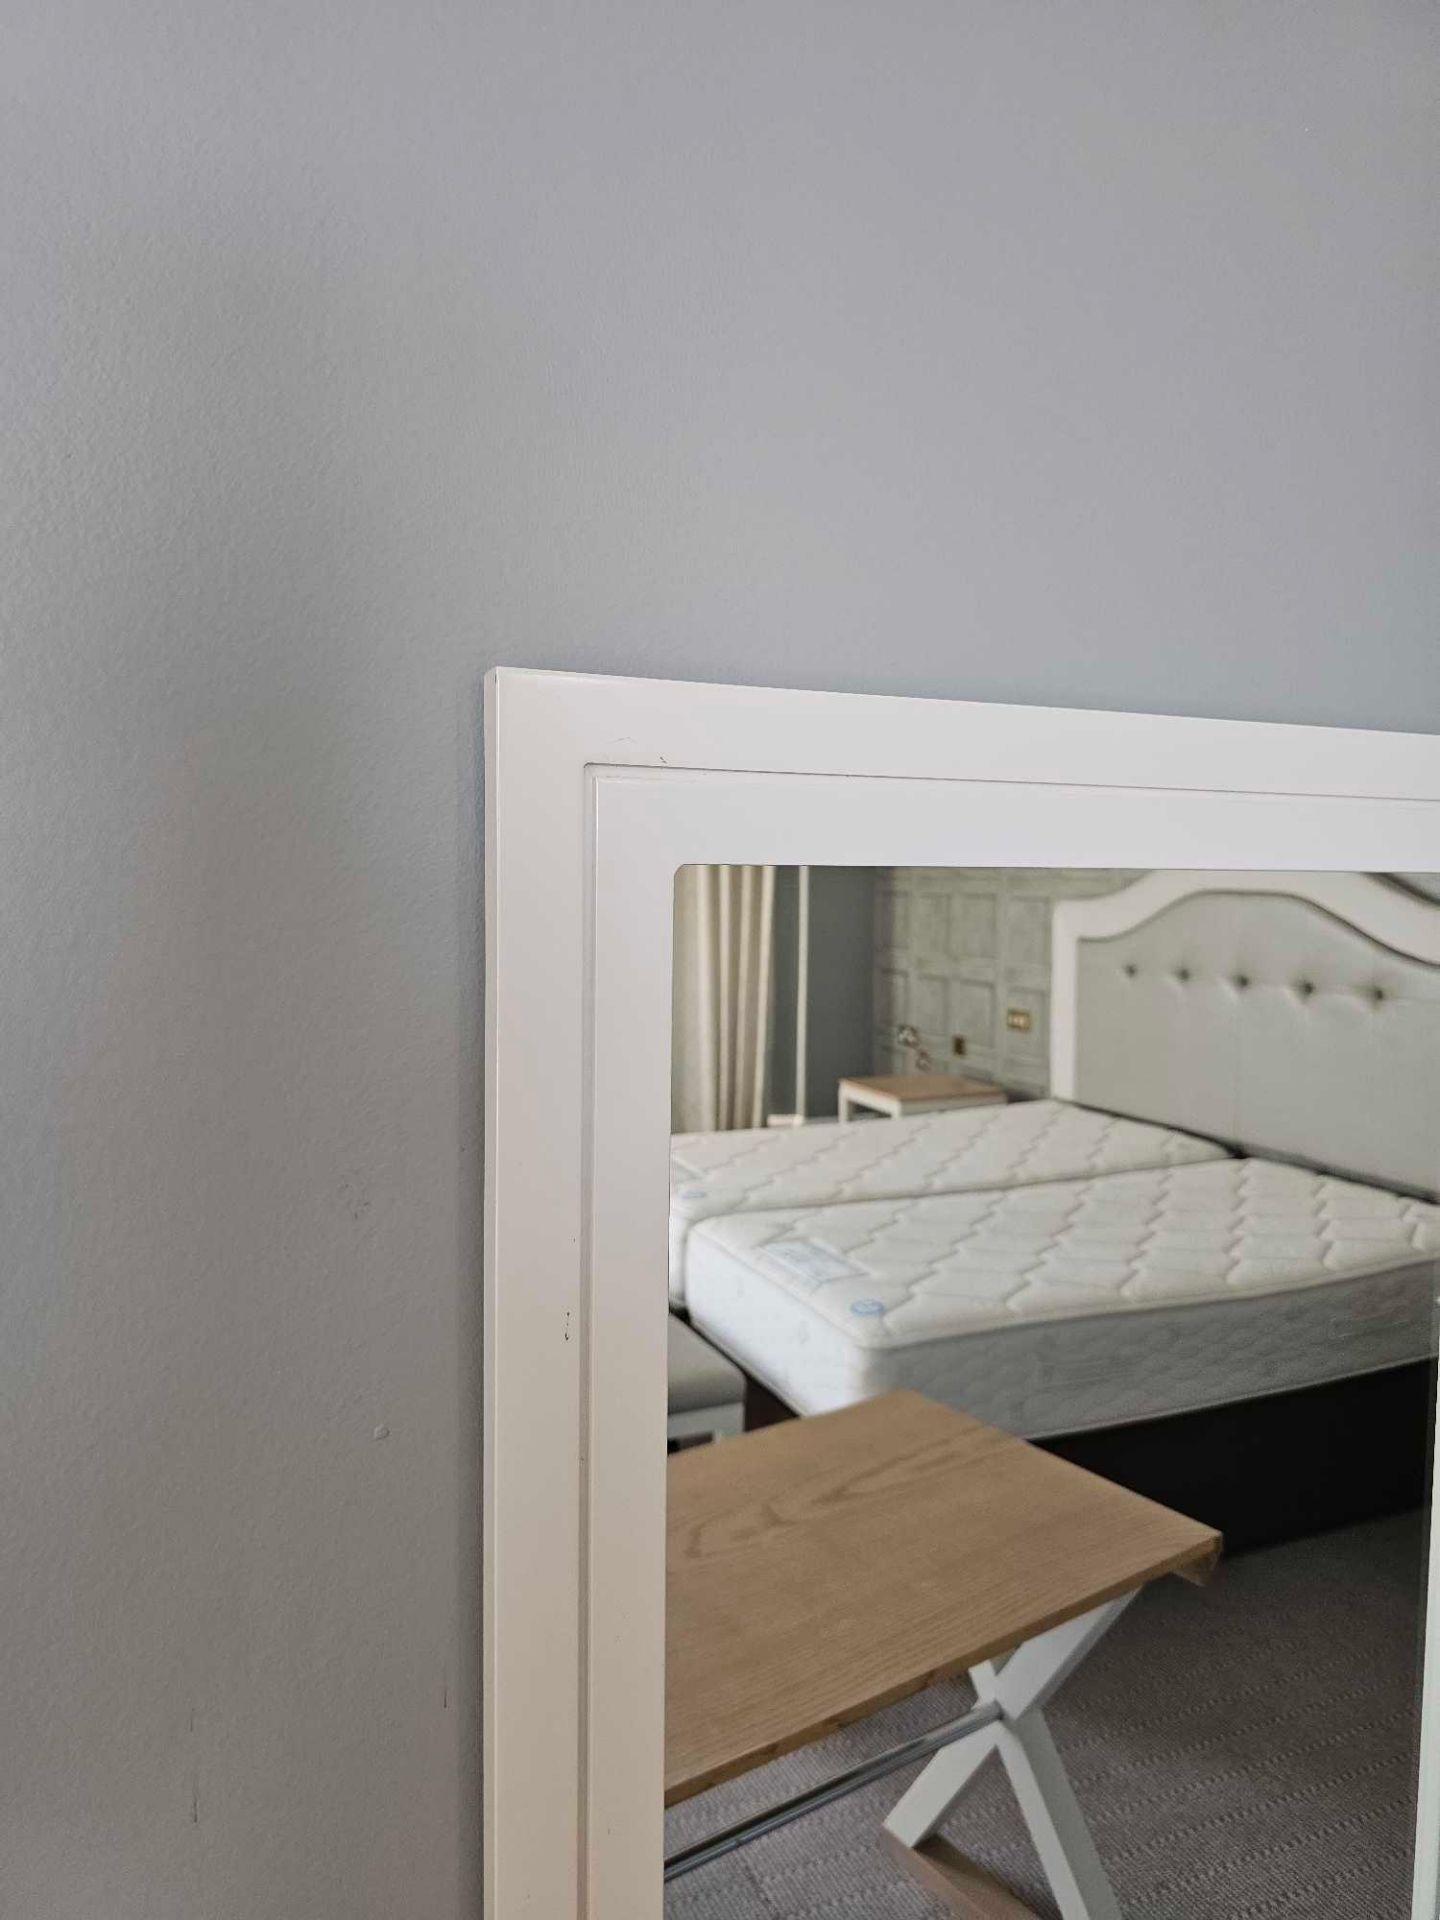 Rectangular Mirror A Bright White Gloss Finish On A Clean, Contemporary, Classic Design, With A - Image 2 of 2